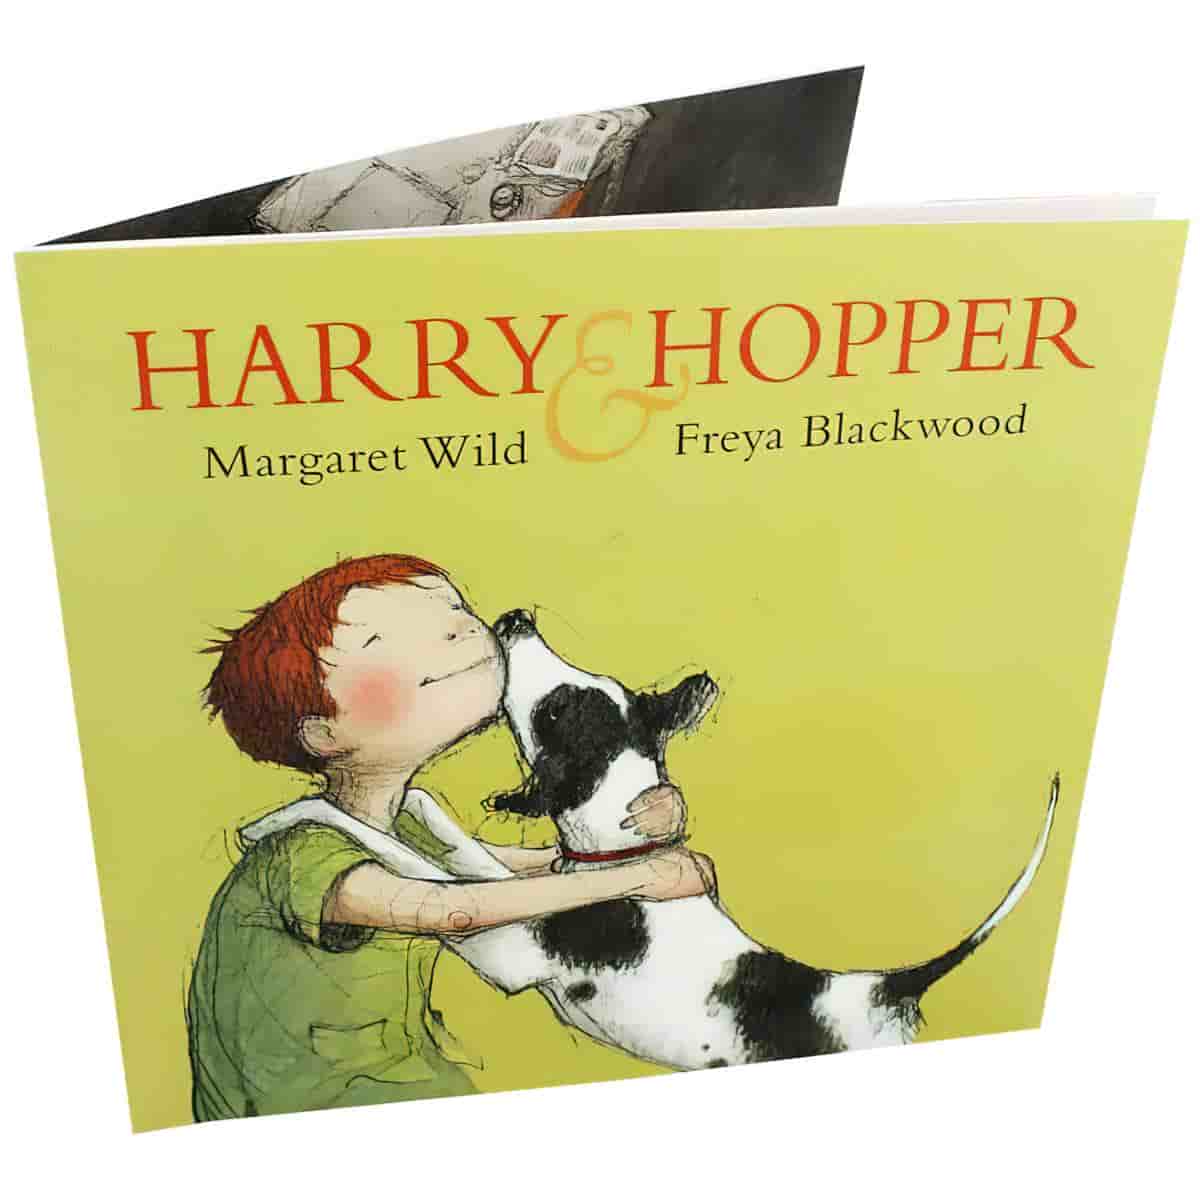 Harry and Hopper by Margaret Wild and Freya Blackwood Analysis